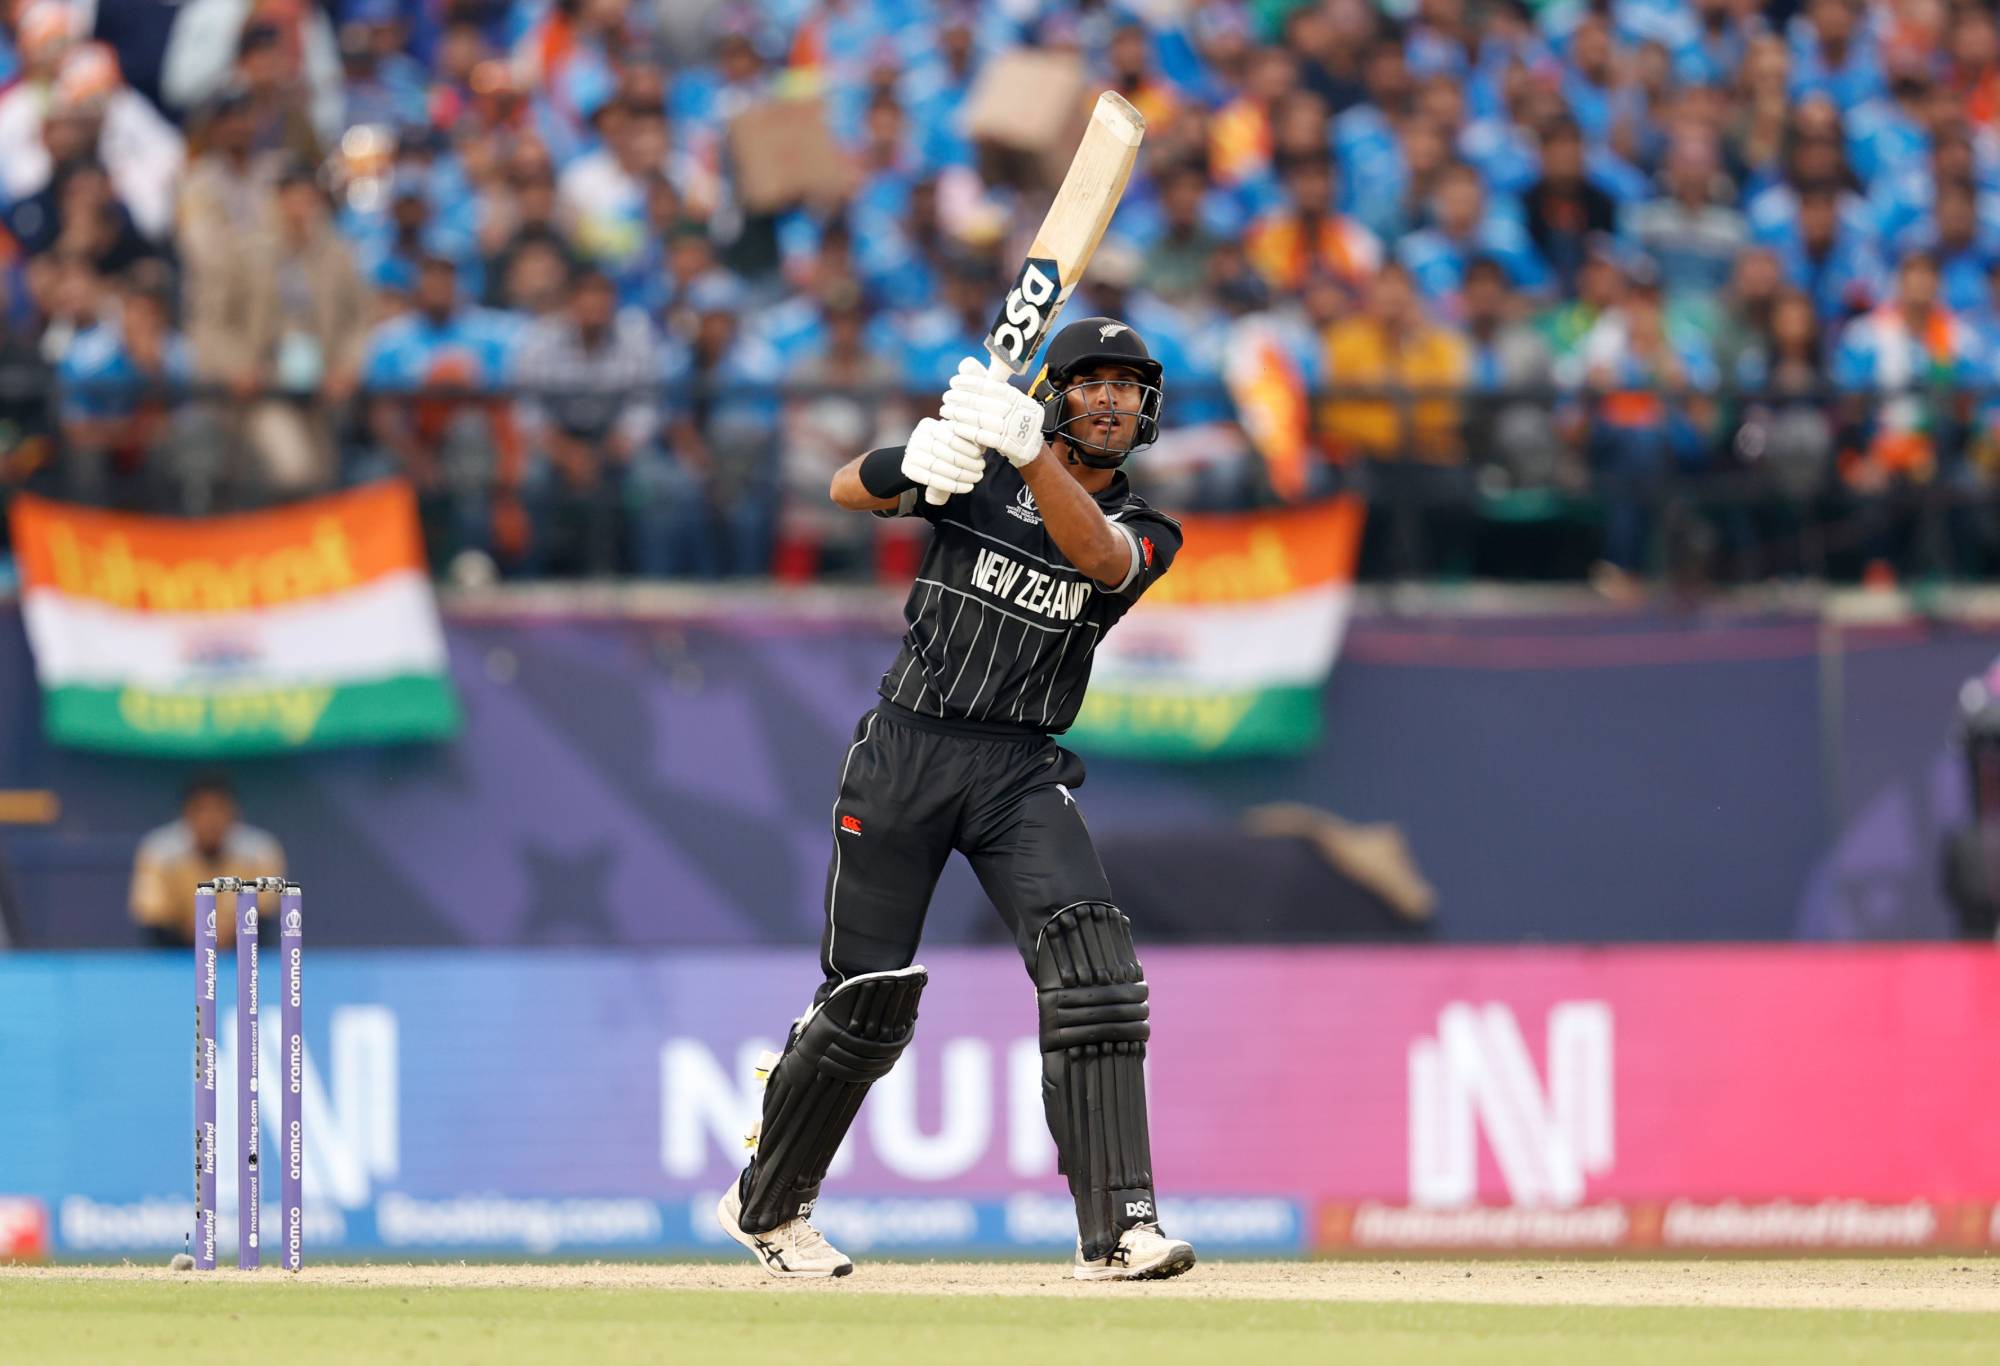 DHARAMSALA, INDIA - OCTOBER 22: Rachin Ravindra of New Zealand bats during the ICC Men's Cricket World Cup India 2023 match between India and New Zealand at HPCA Stadium on October 22, 2023 in Dharamsala, India. (Photo by Darrian Traynor-ICC/ICC via Getty Images)